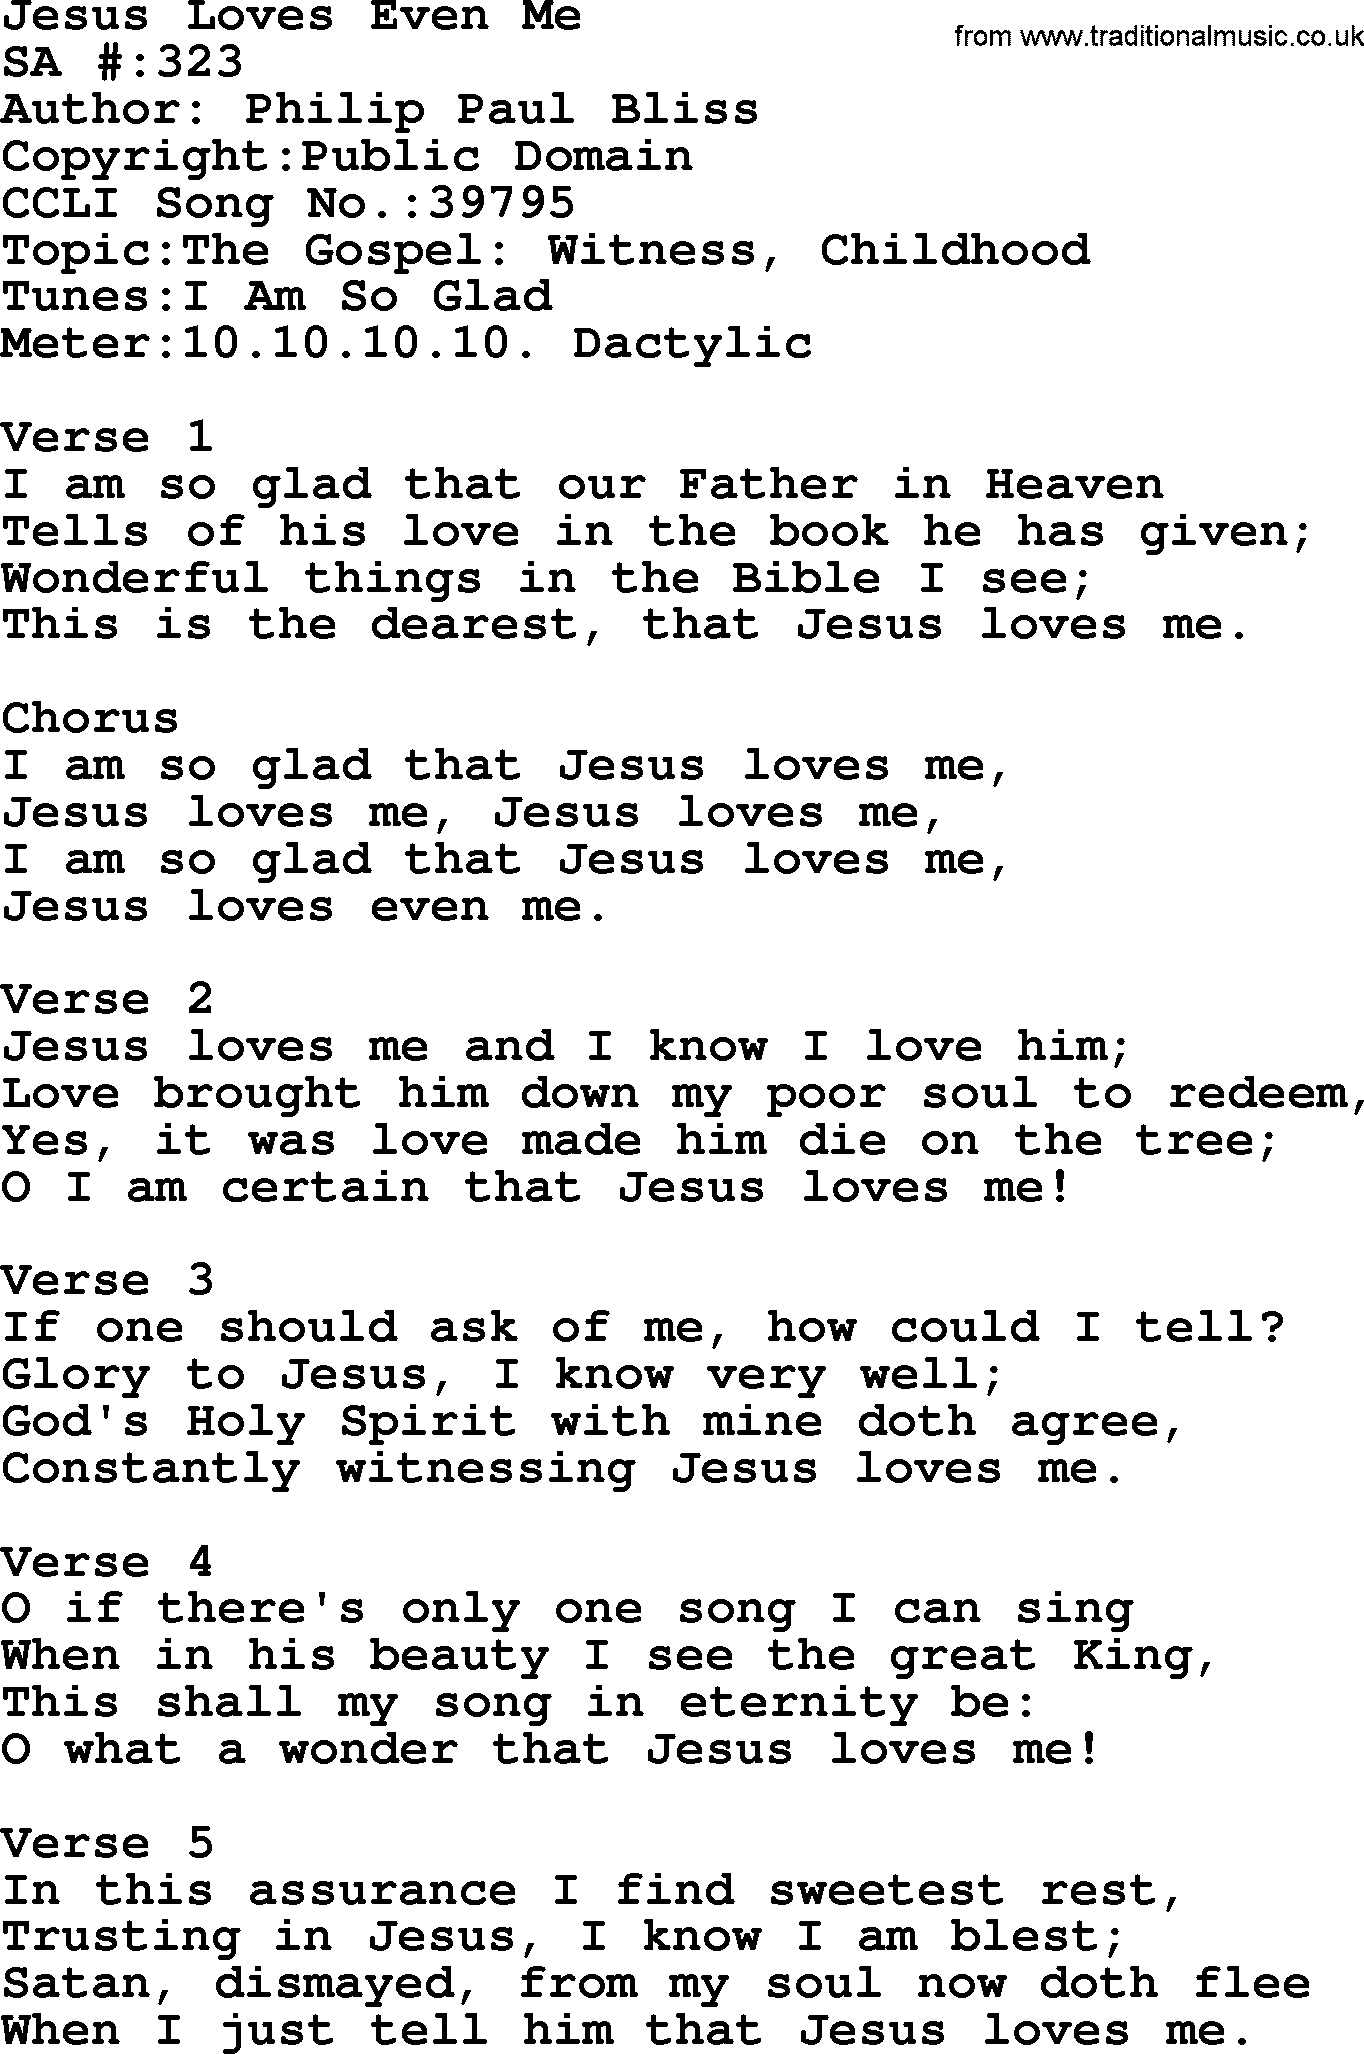 Salvation Army Hymnal, title: Jesus Loves Even Me, with lyrics and PDF,